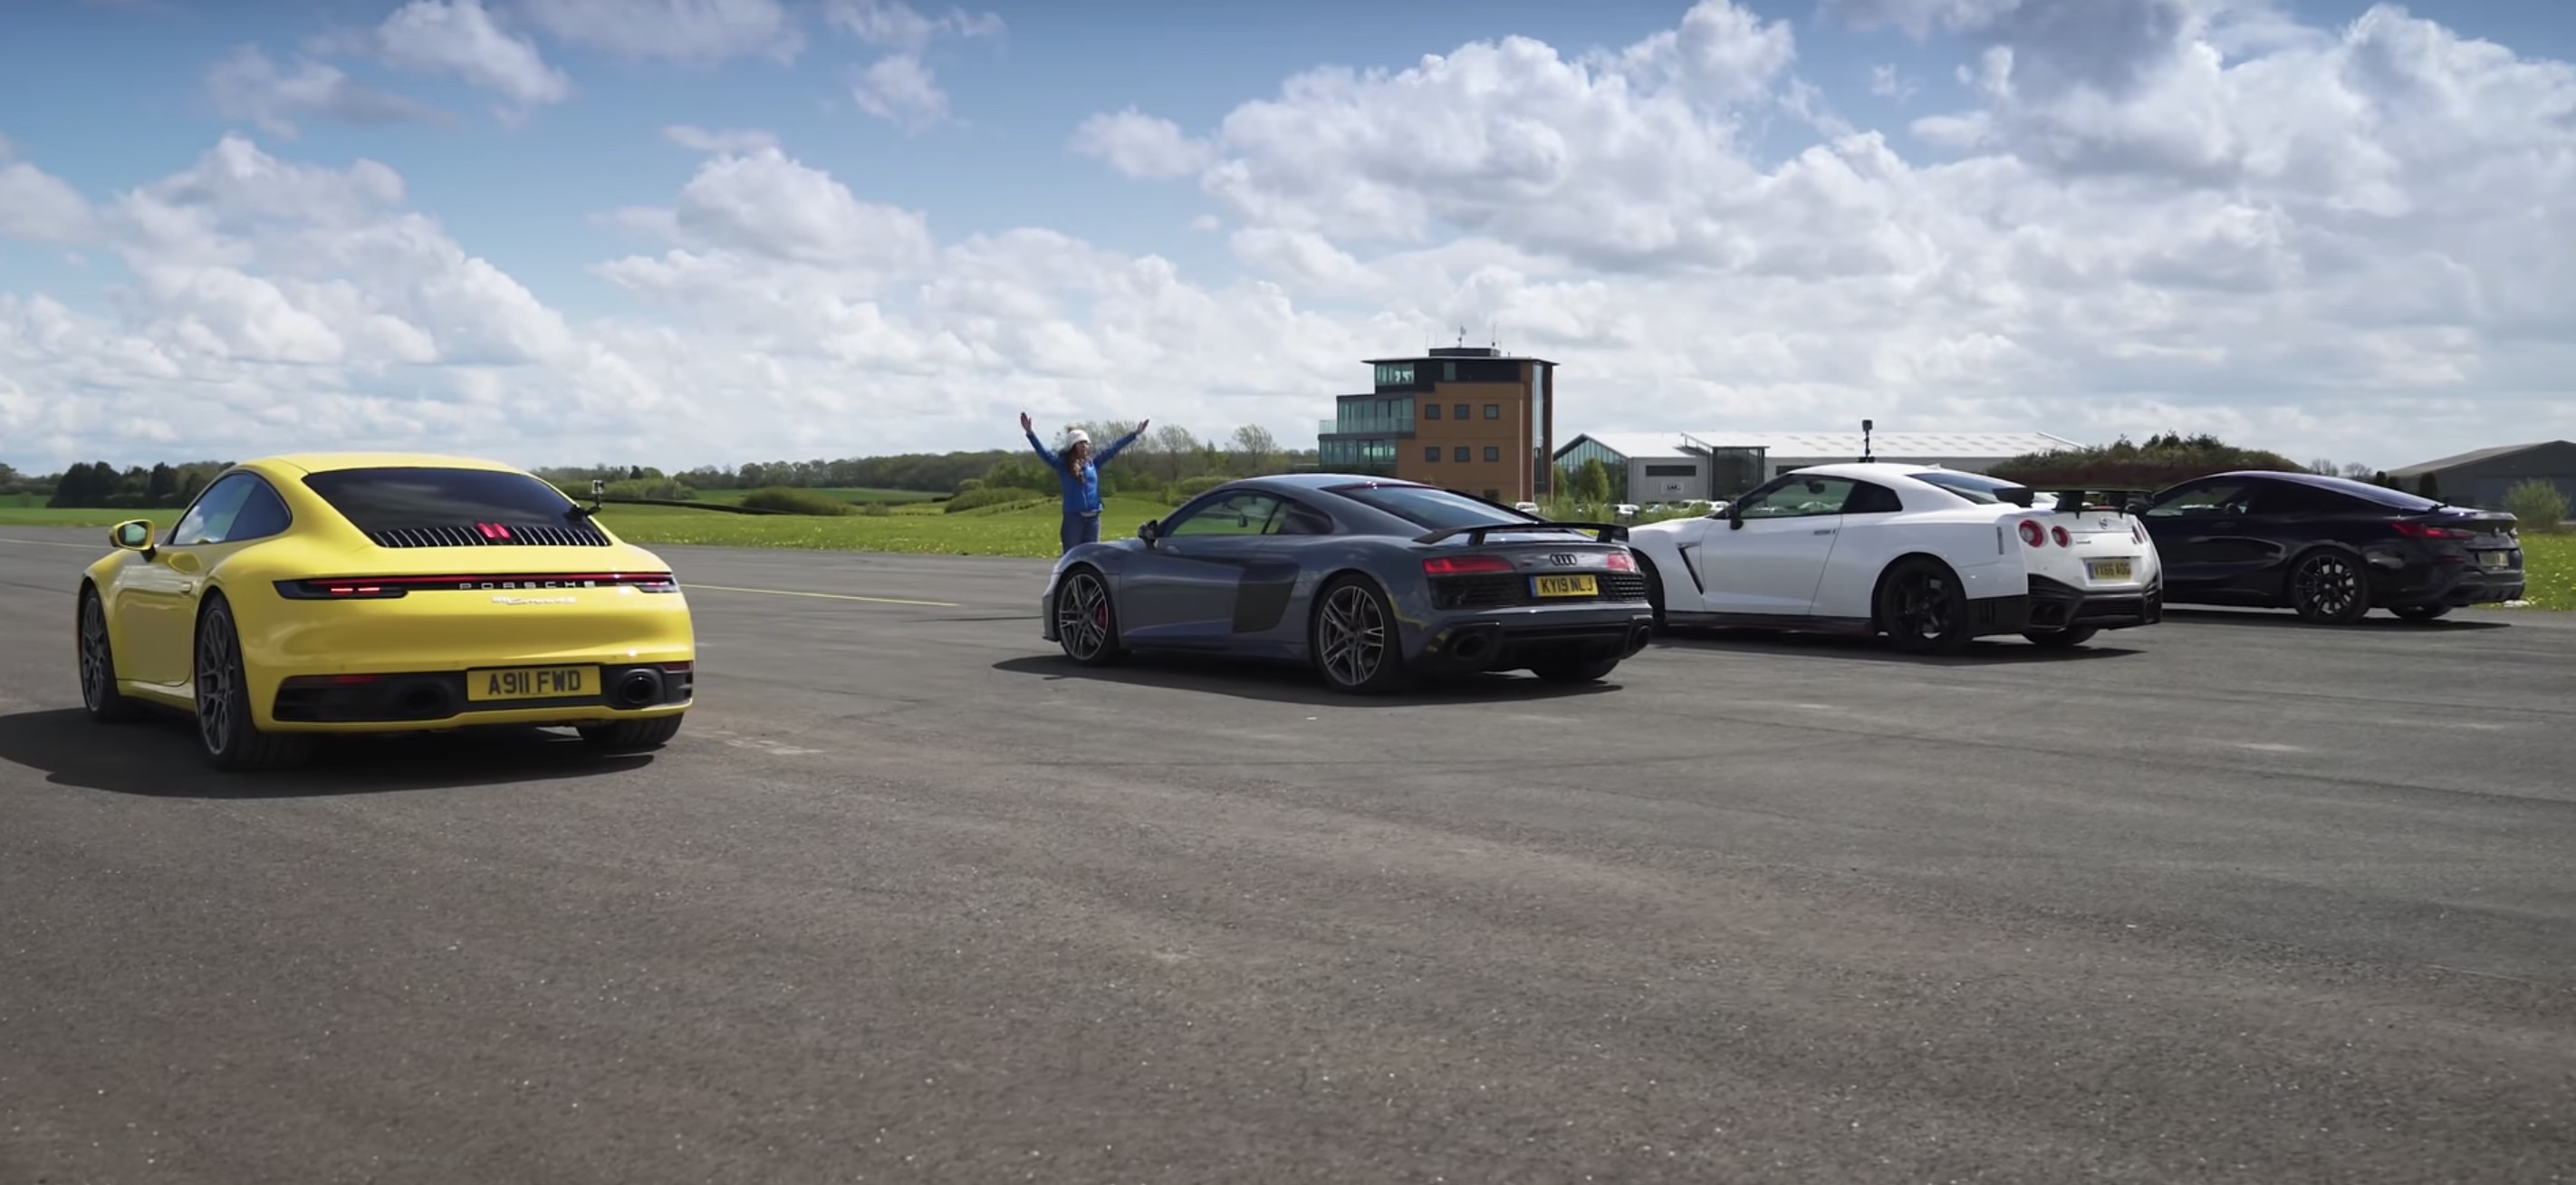 Watch The Porsche 992 Take On The Audi R8 Nissan Gt R Nismo